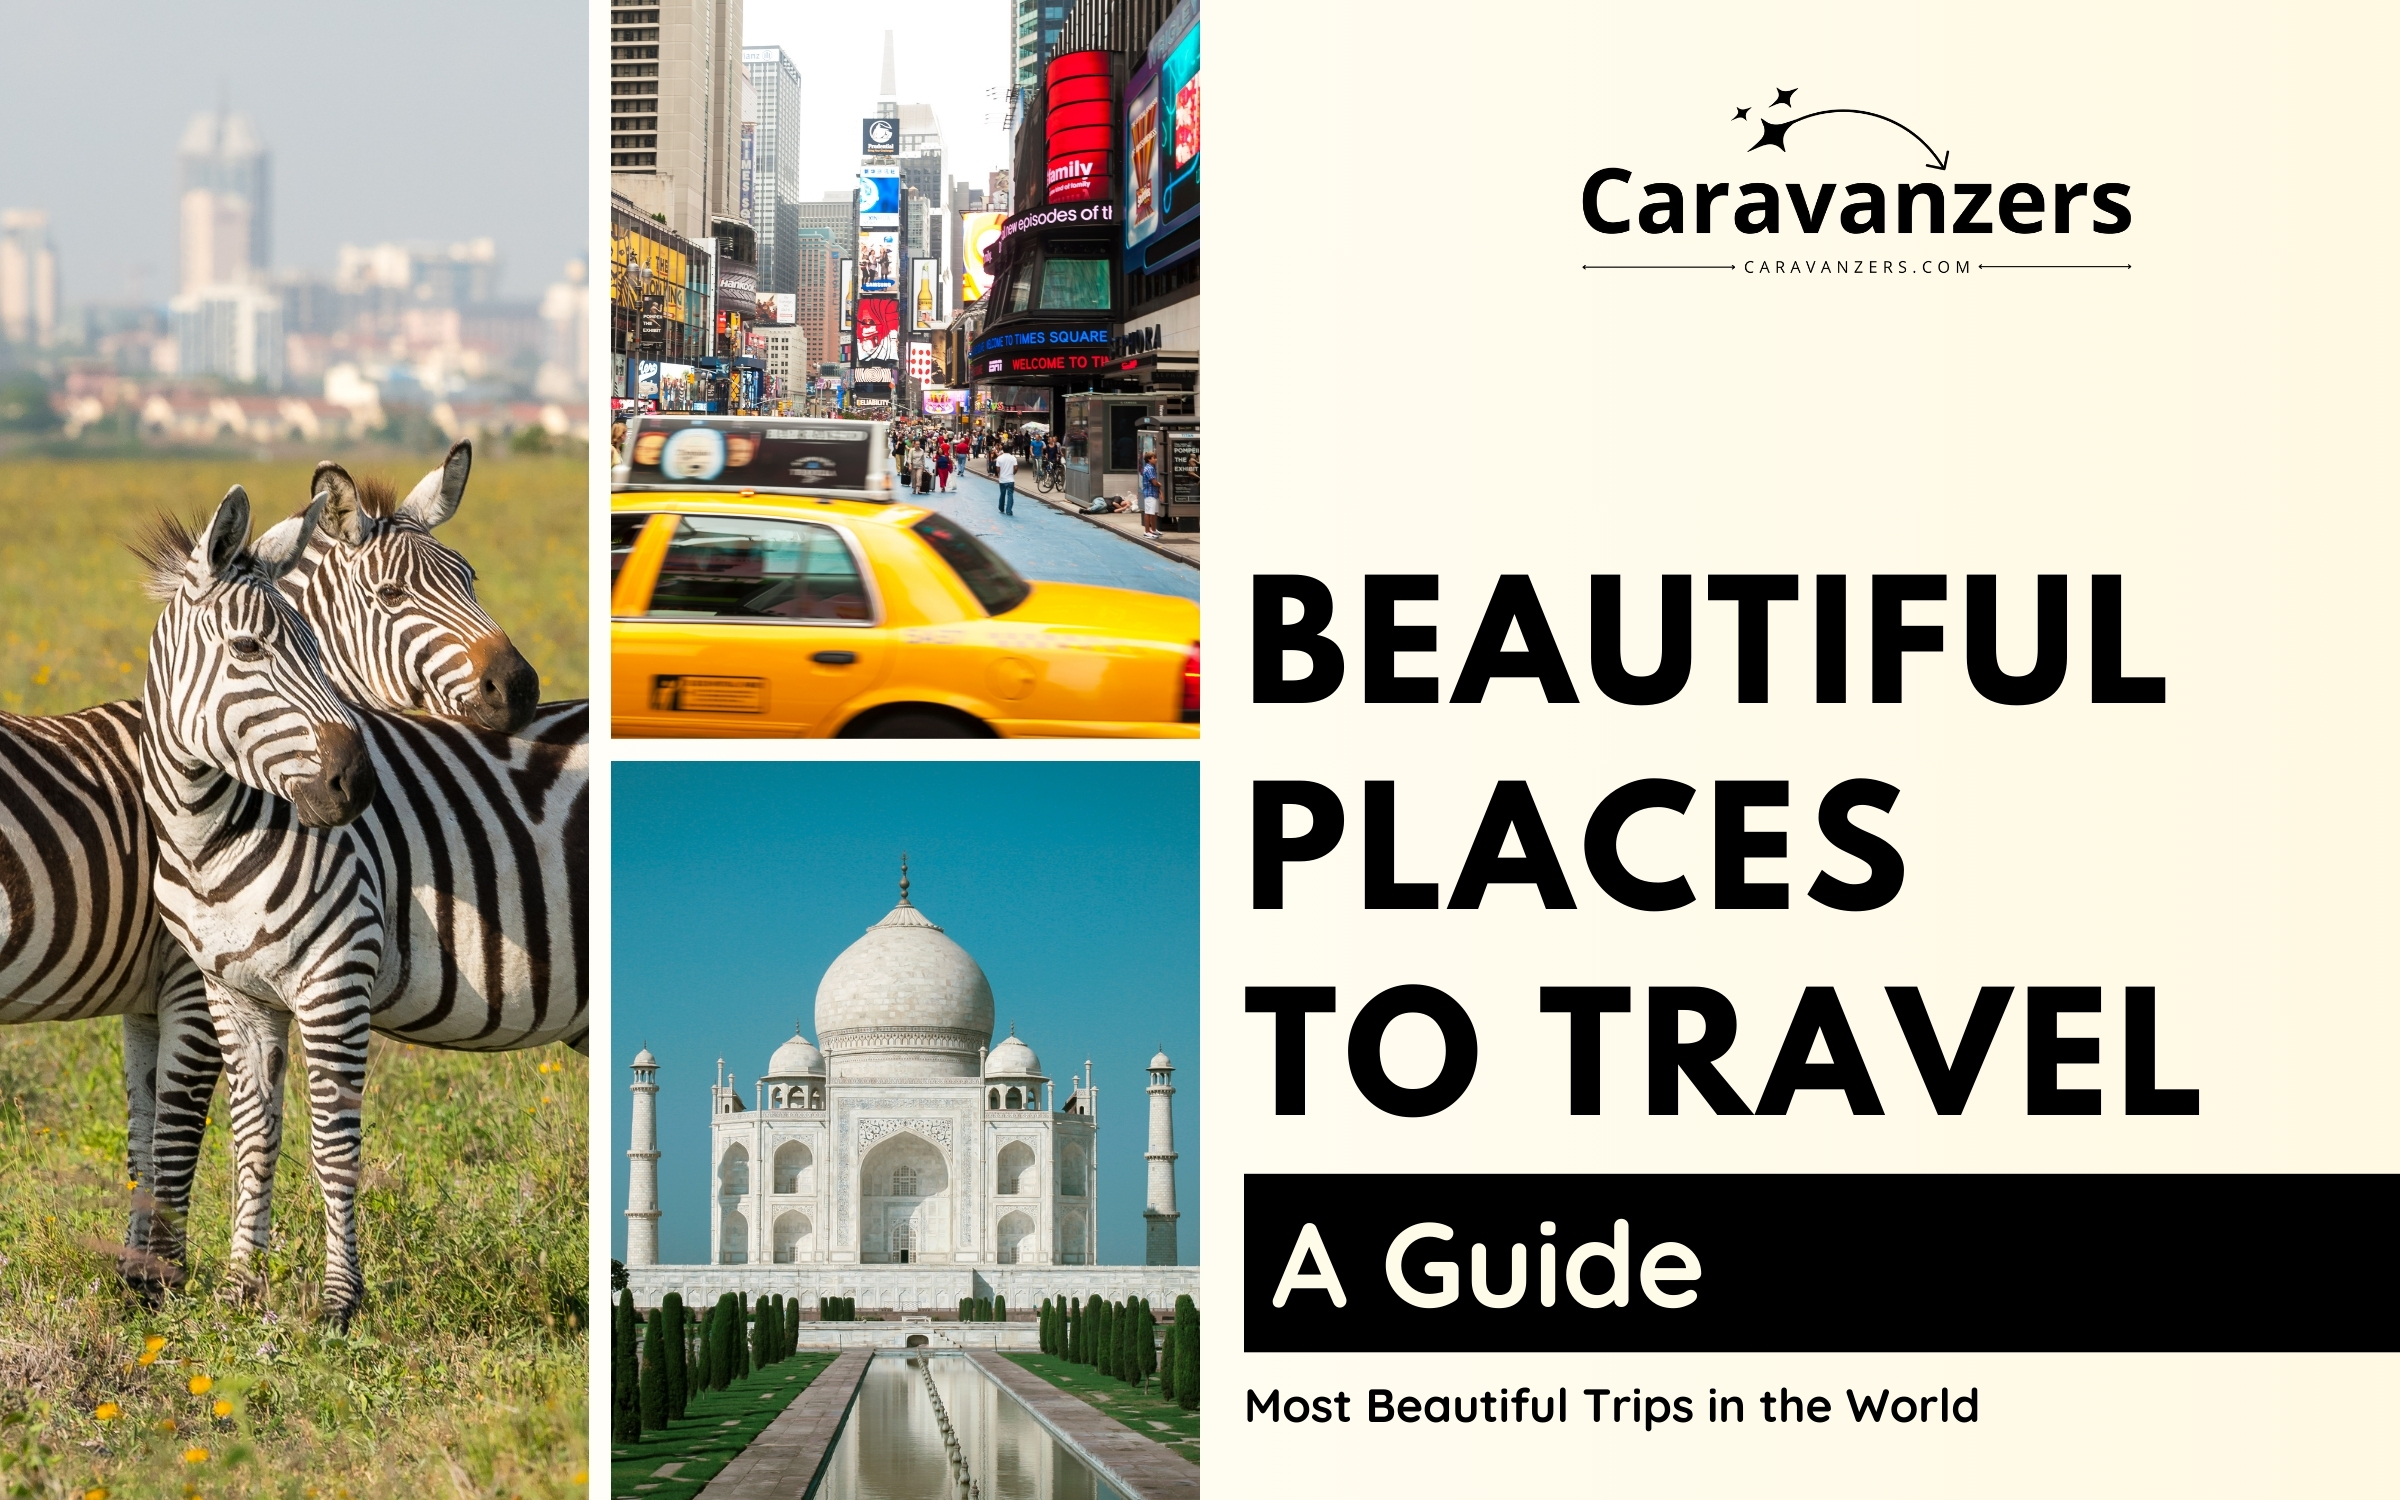 Beautiful Places to Travel - 101 Destinations to Visit